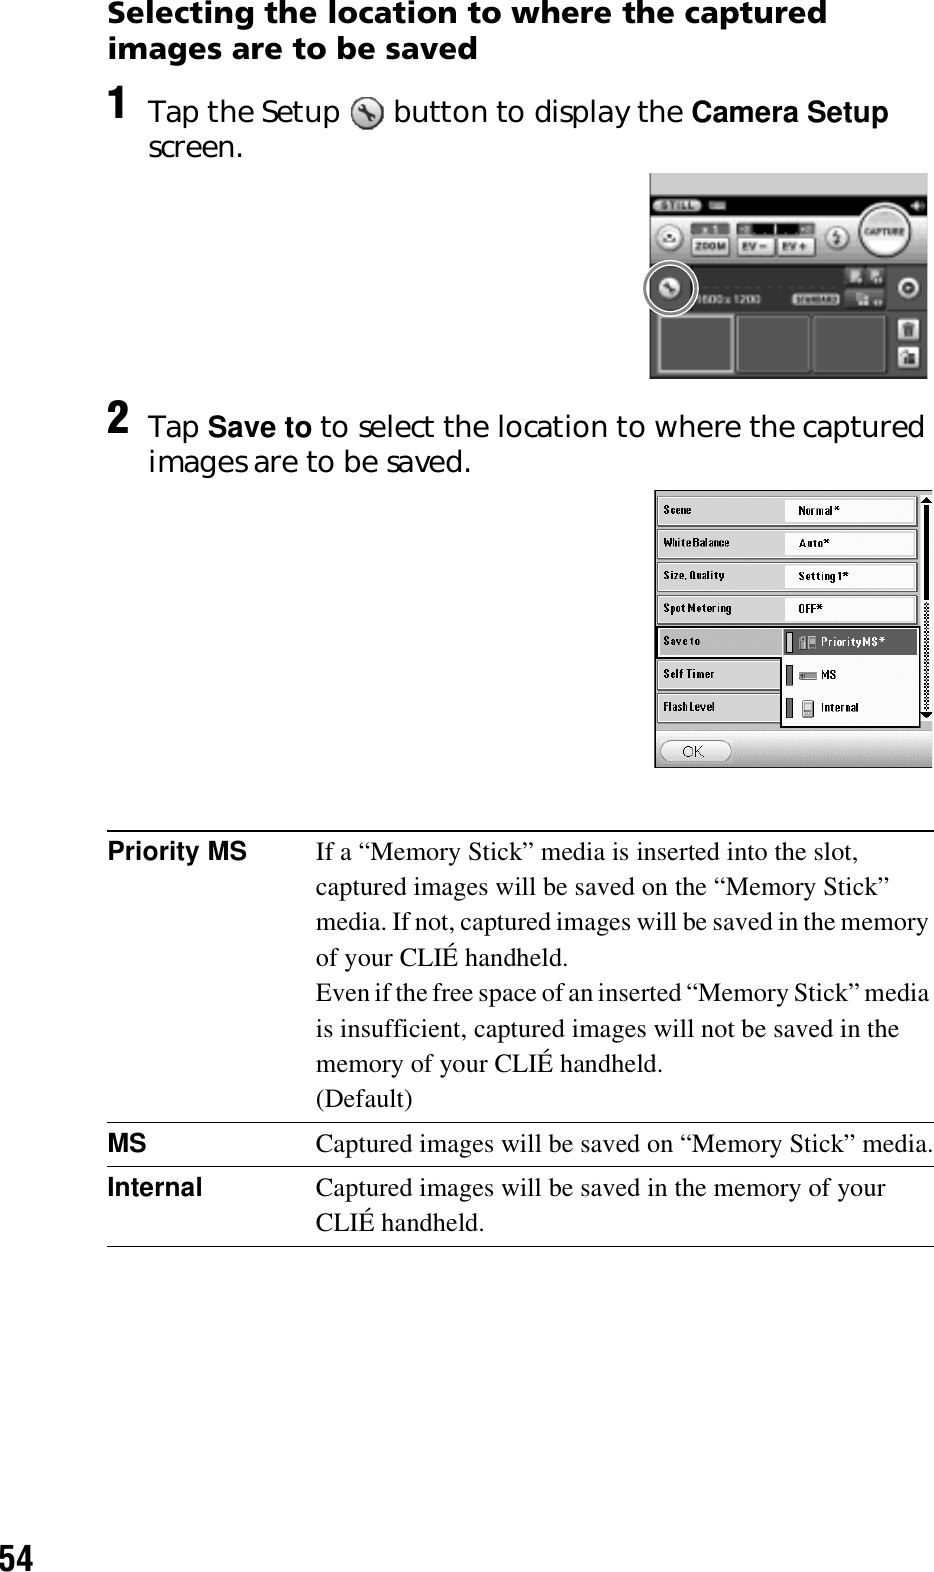 54Selecting the location to where the captured images are to be saved1Tap the Setup   button to display the Camera Setup screen.2Tap Save to to select the location to where the captured images are to be saved. Priority MS If a “Memory Stick” media is inserted into the slot, captured images will be saved on the “Memory Stick” media. If not, captured images will be saved in the memory of your CLIÉ handheld.Even if the free space of an inserted “Memory Stick” media is insufficient, captured images will not be saved in the memory of your CLIÉ handheld.(Default)MS Captured images will be saved on “Memory Stick” media.Internal Captured images will be saved in the memory of your CLIÉ handheld.